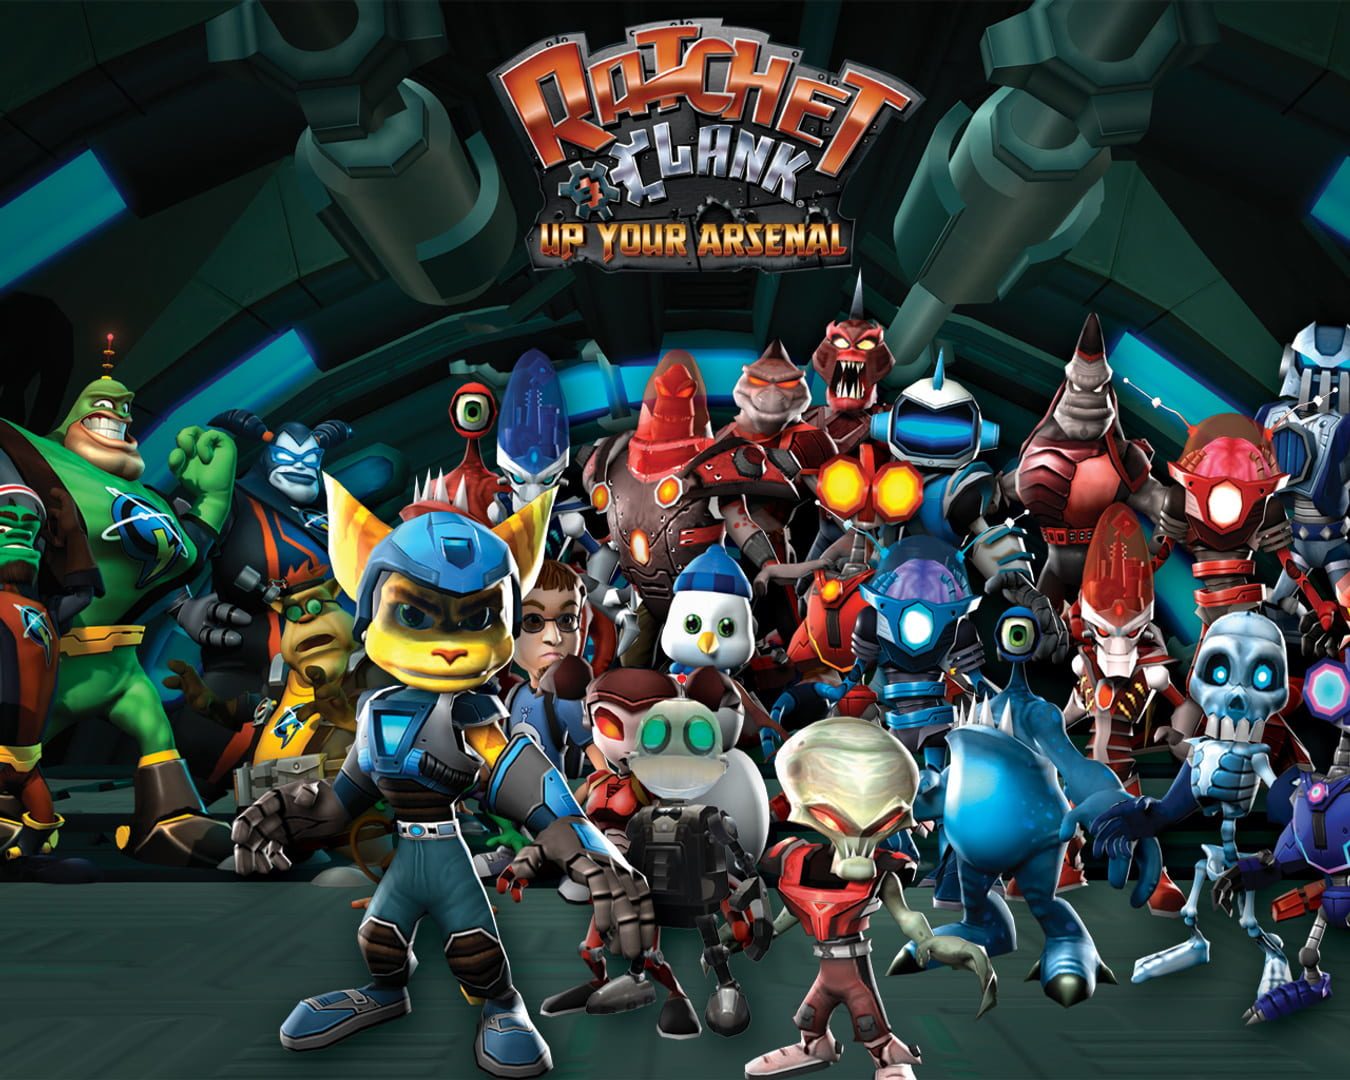 video game, ratchet & clank: up your arsenal, ratchet & clank